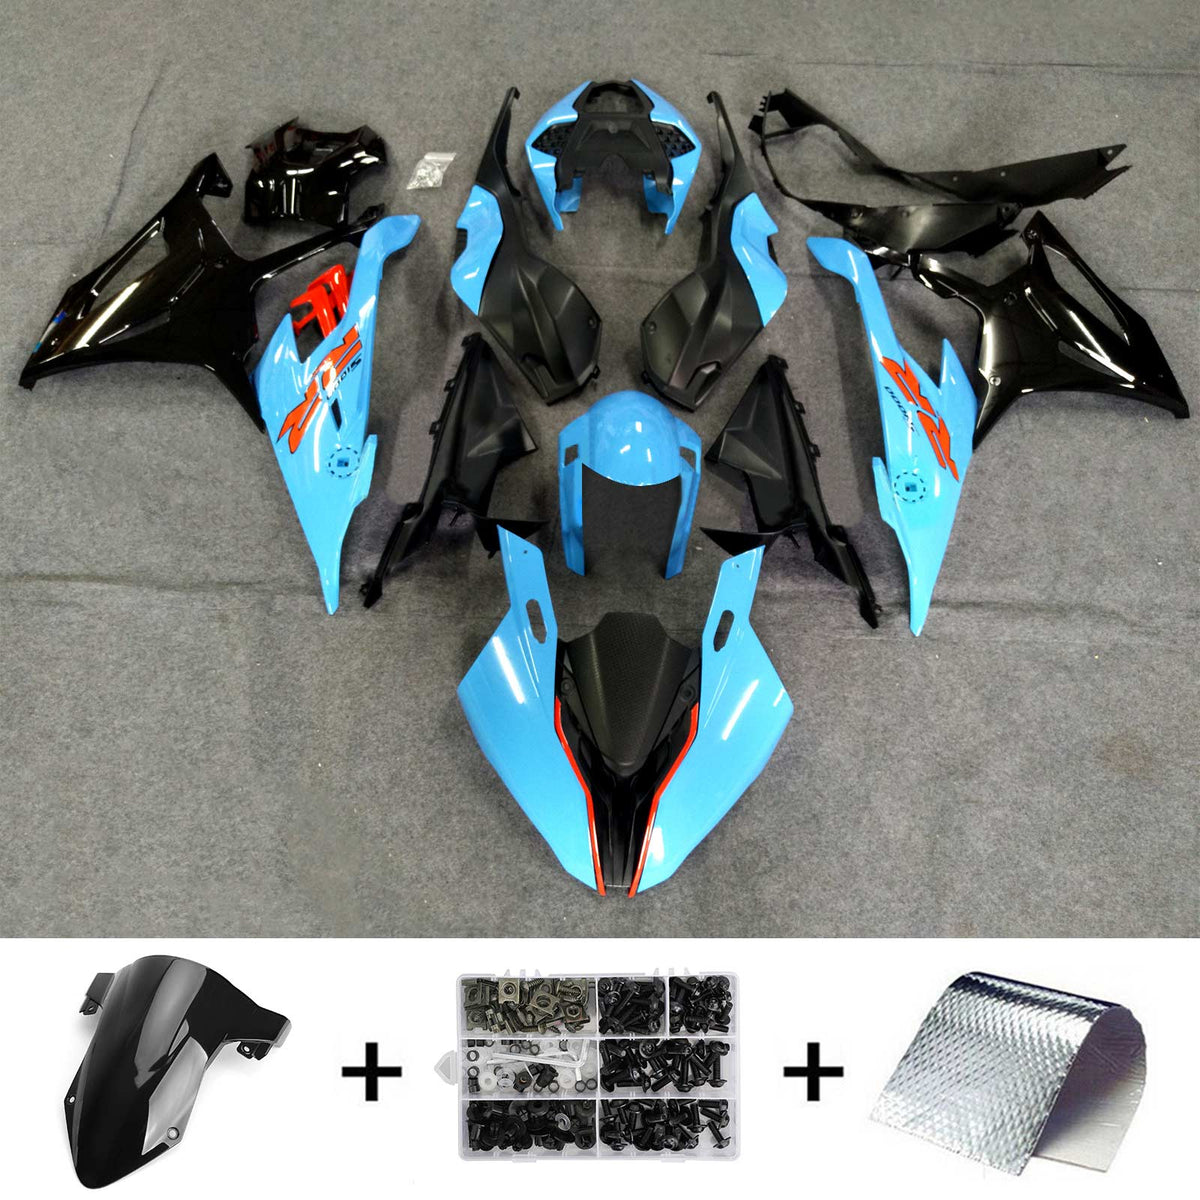 Amotopart 2019-2022 Kit carena racing BMW S1000RR/M1000RR nero ciano